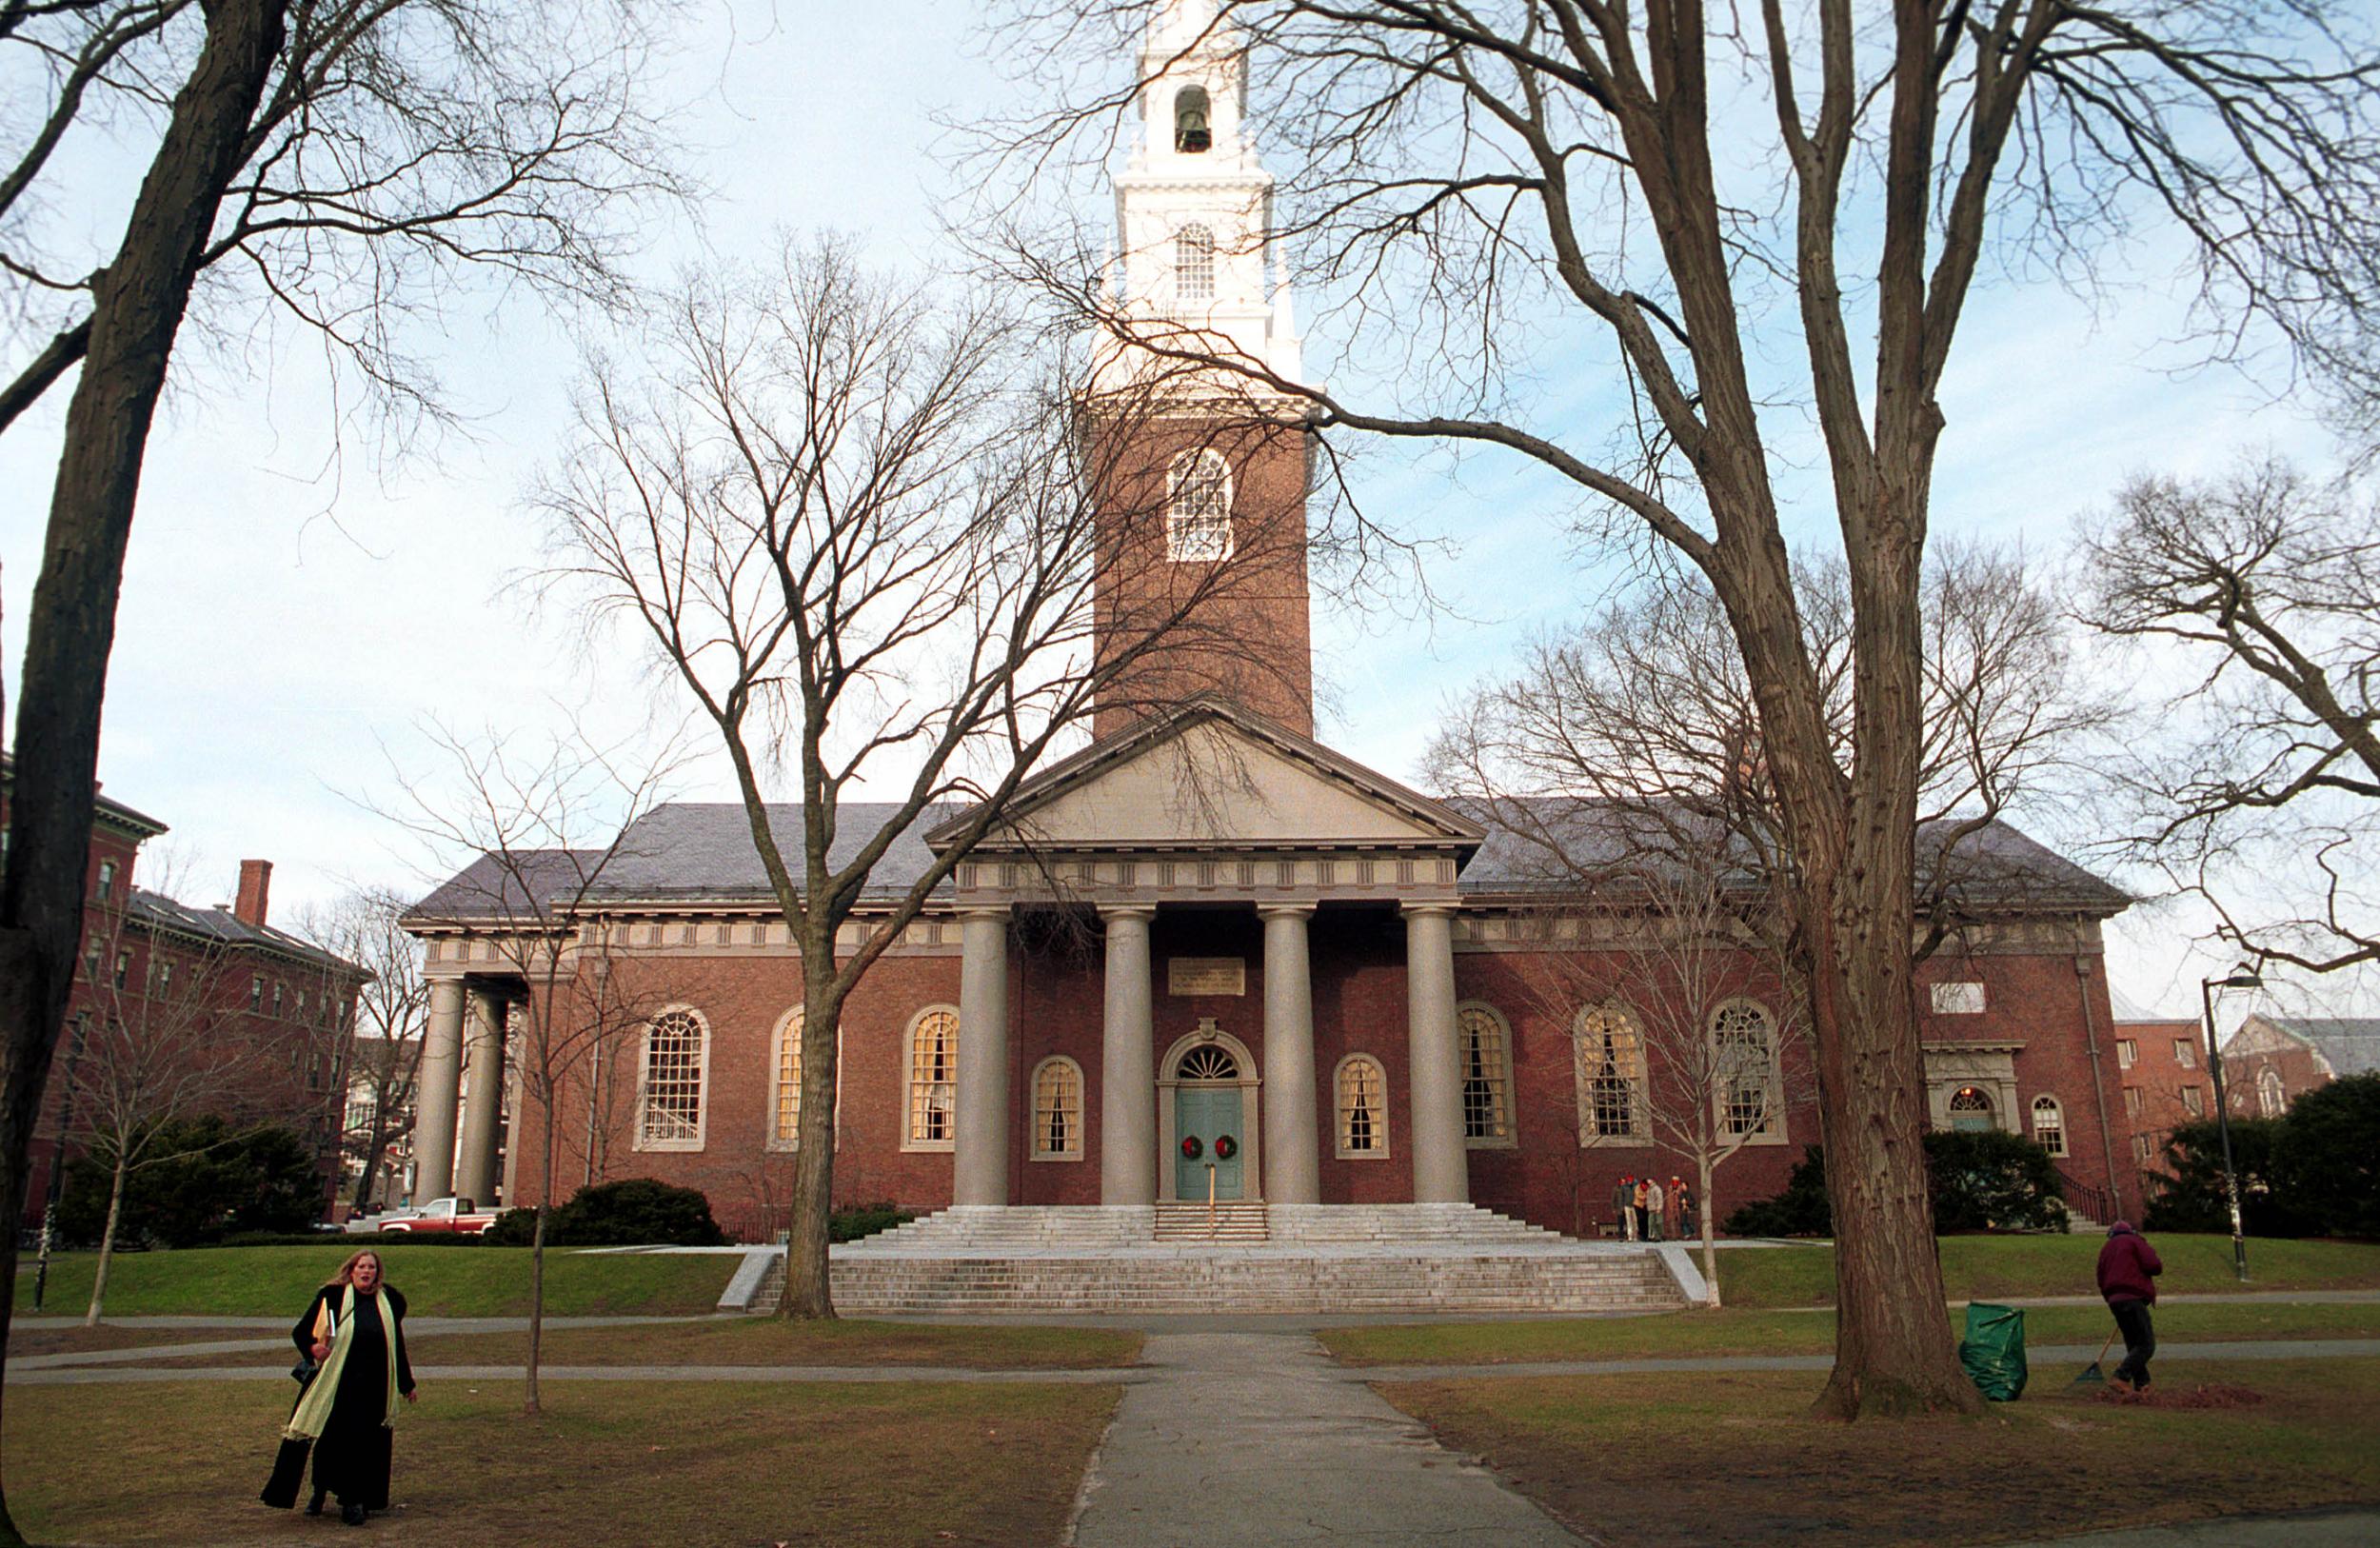 Four buildings in Harvard's central campus were evacuated after the bomb threat